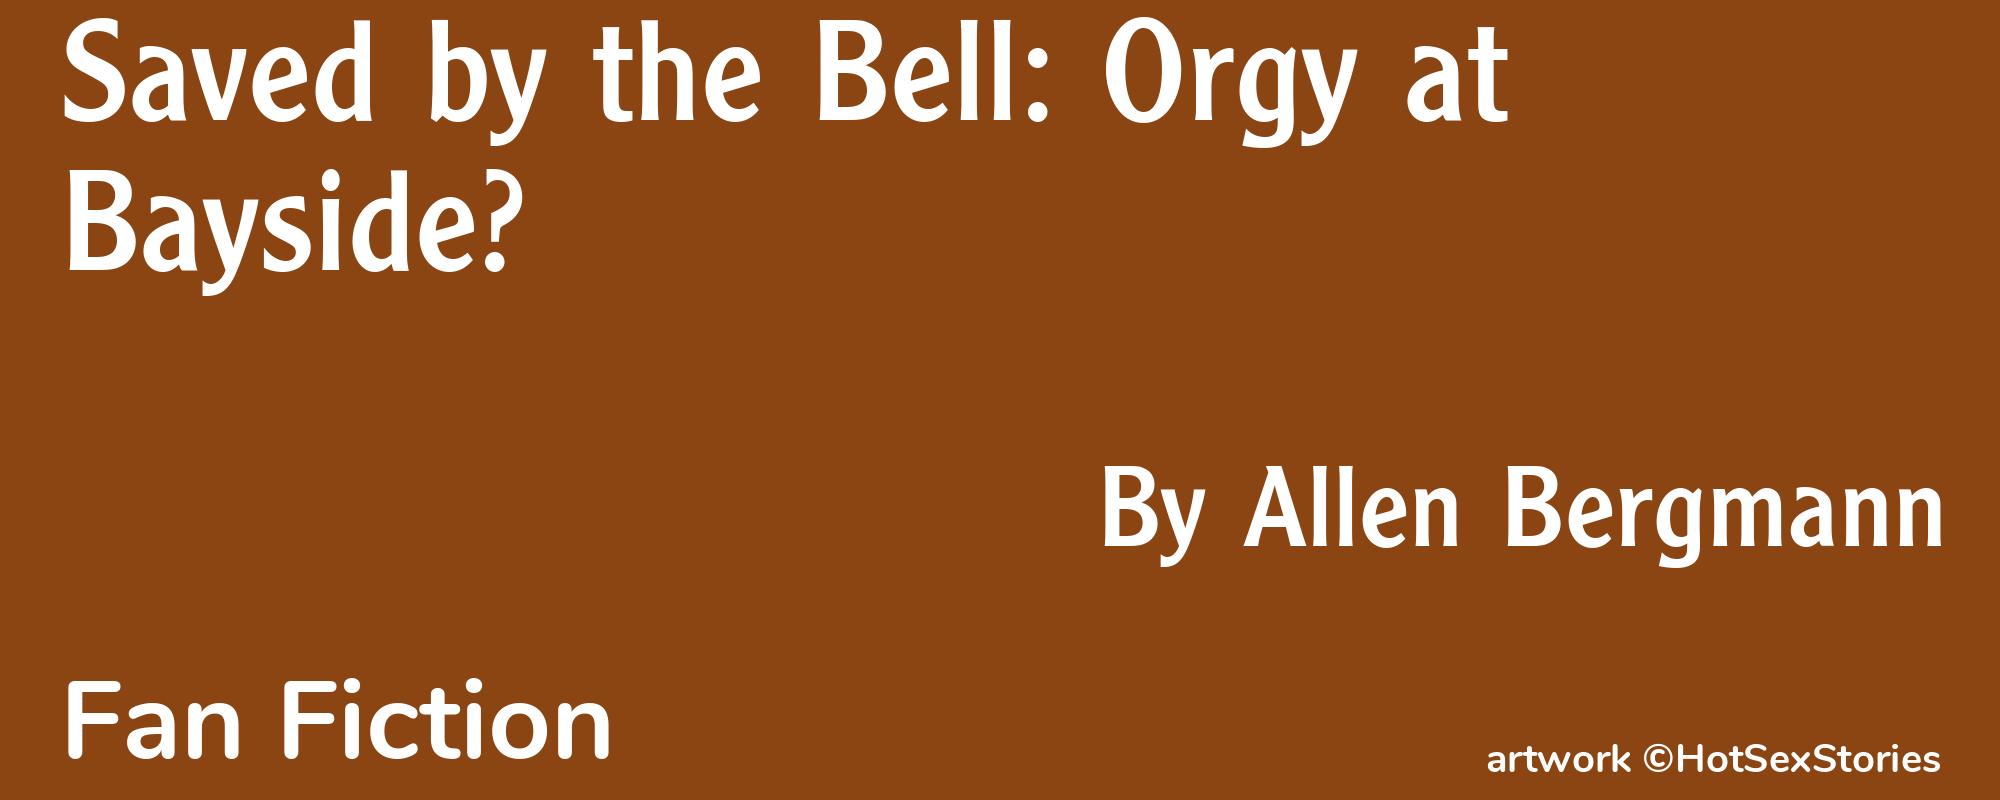 Saved by the Bell: Orgy at Bayside? - Cover